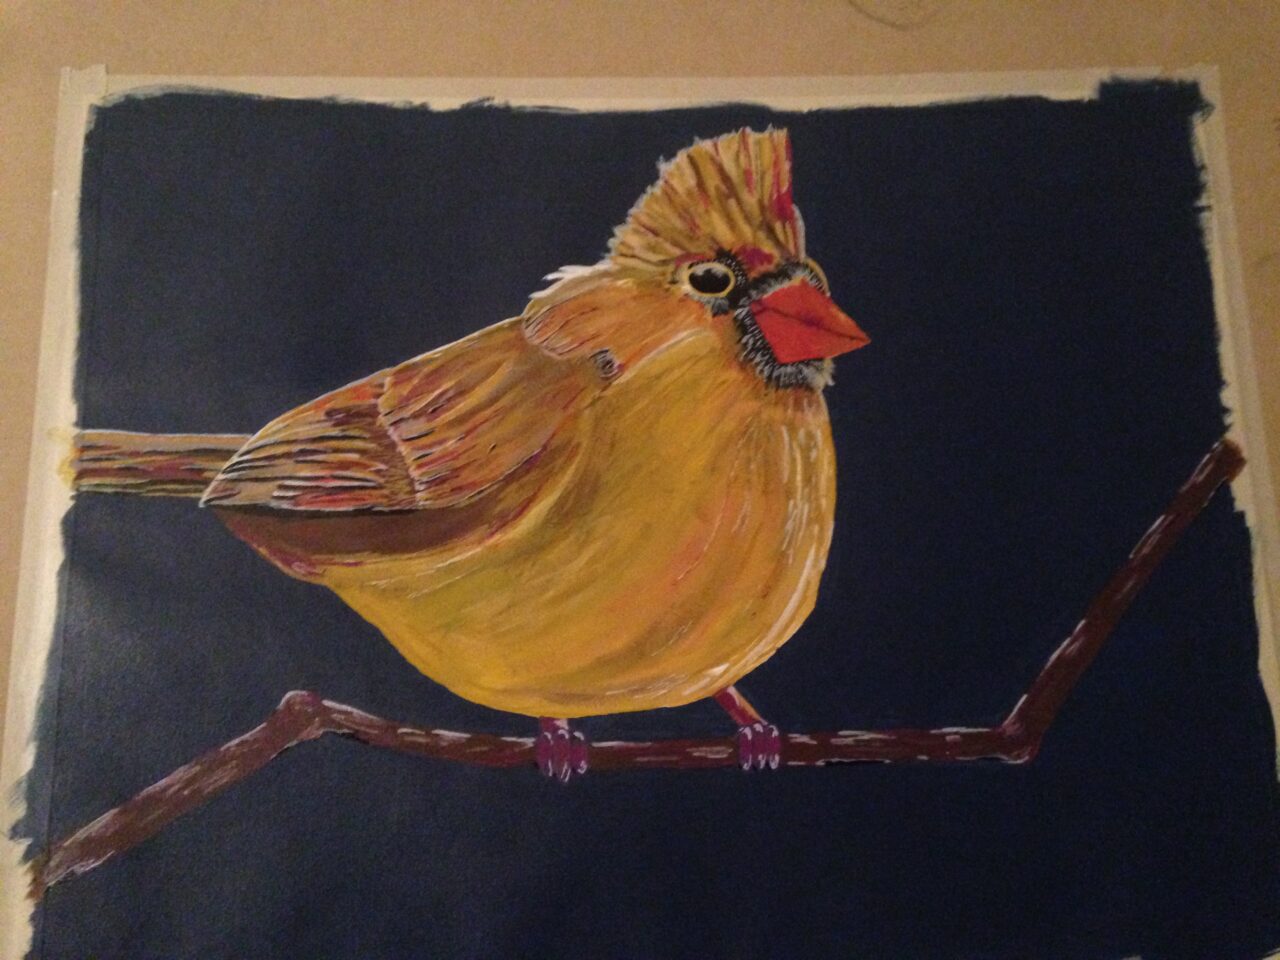 Northern Cardinal by Danielle Ayers